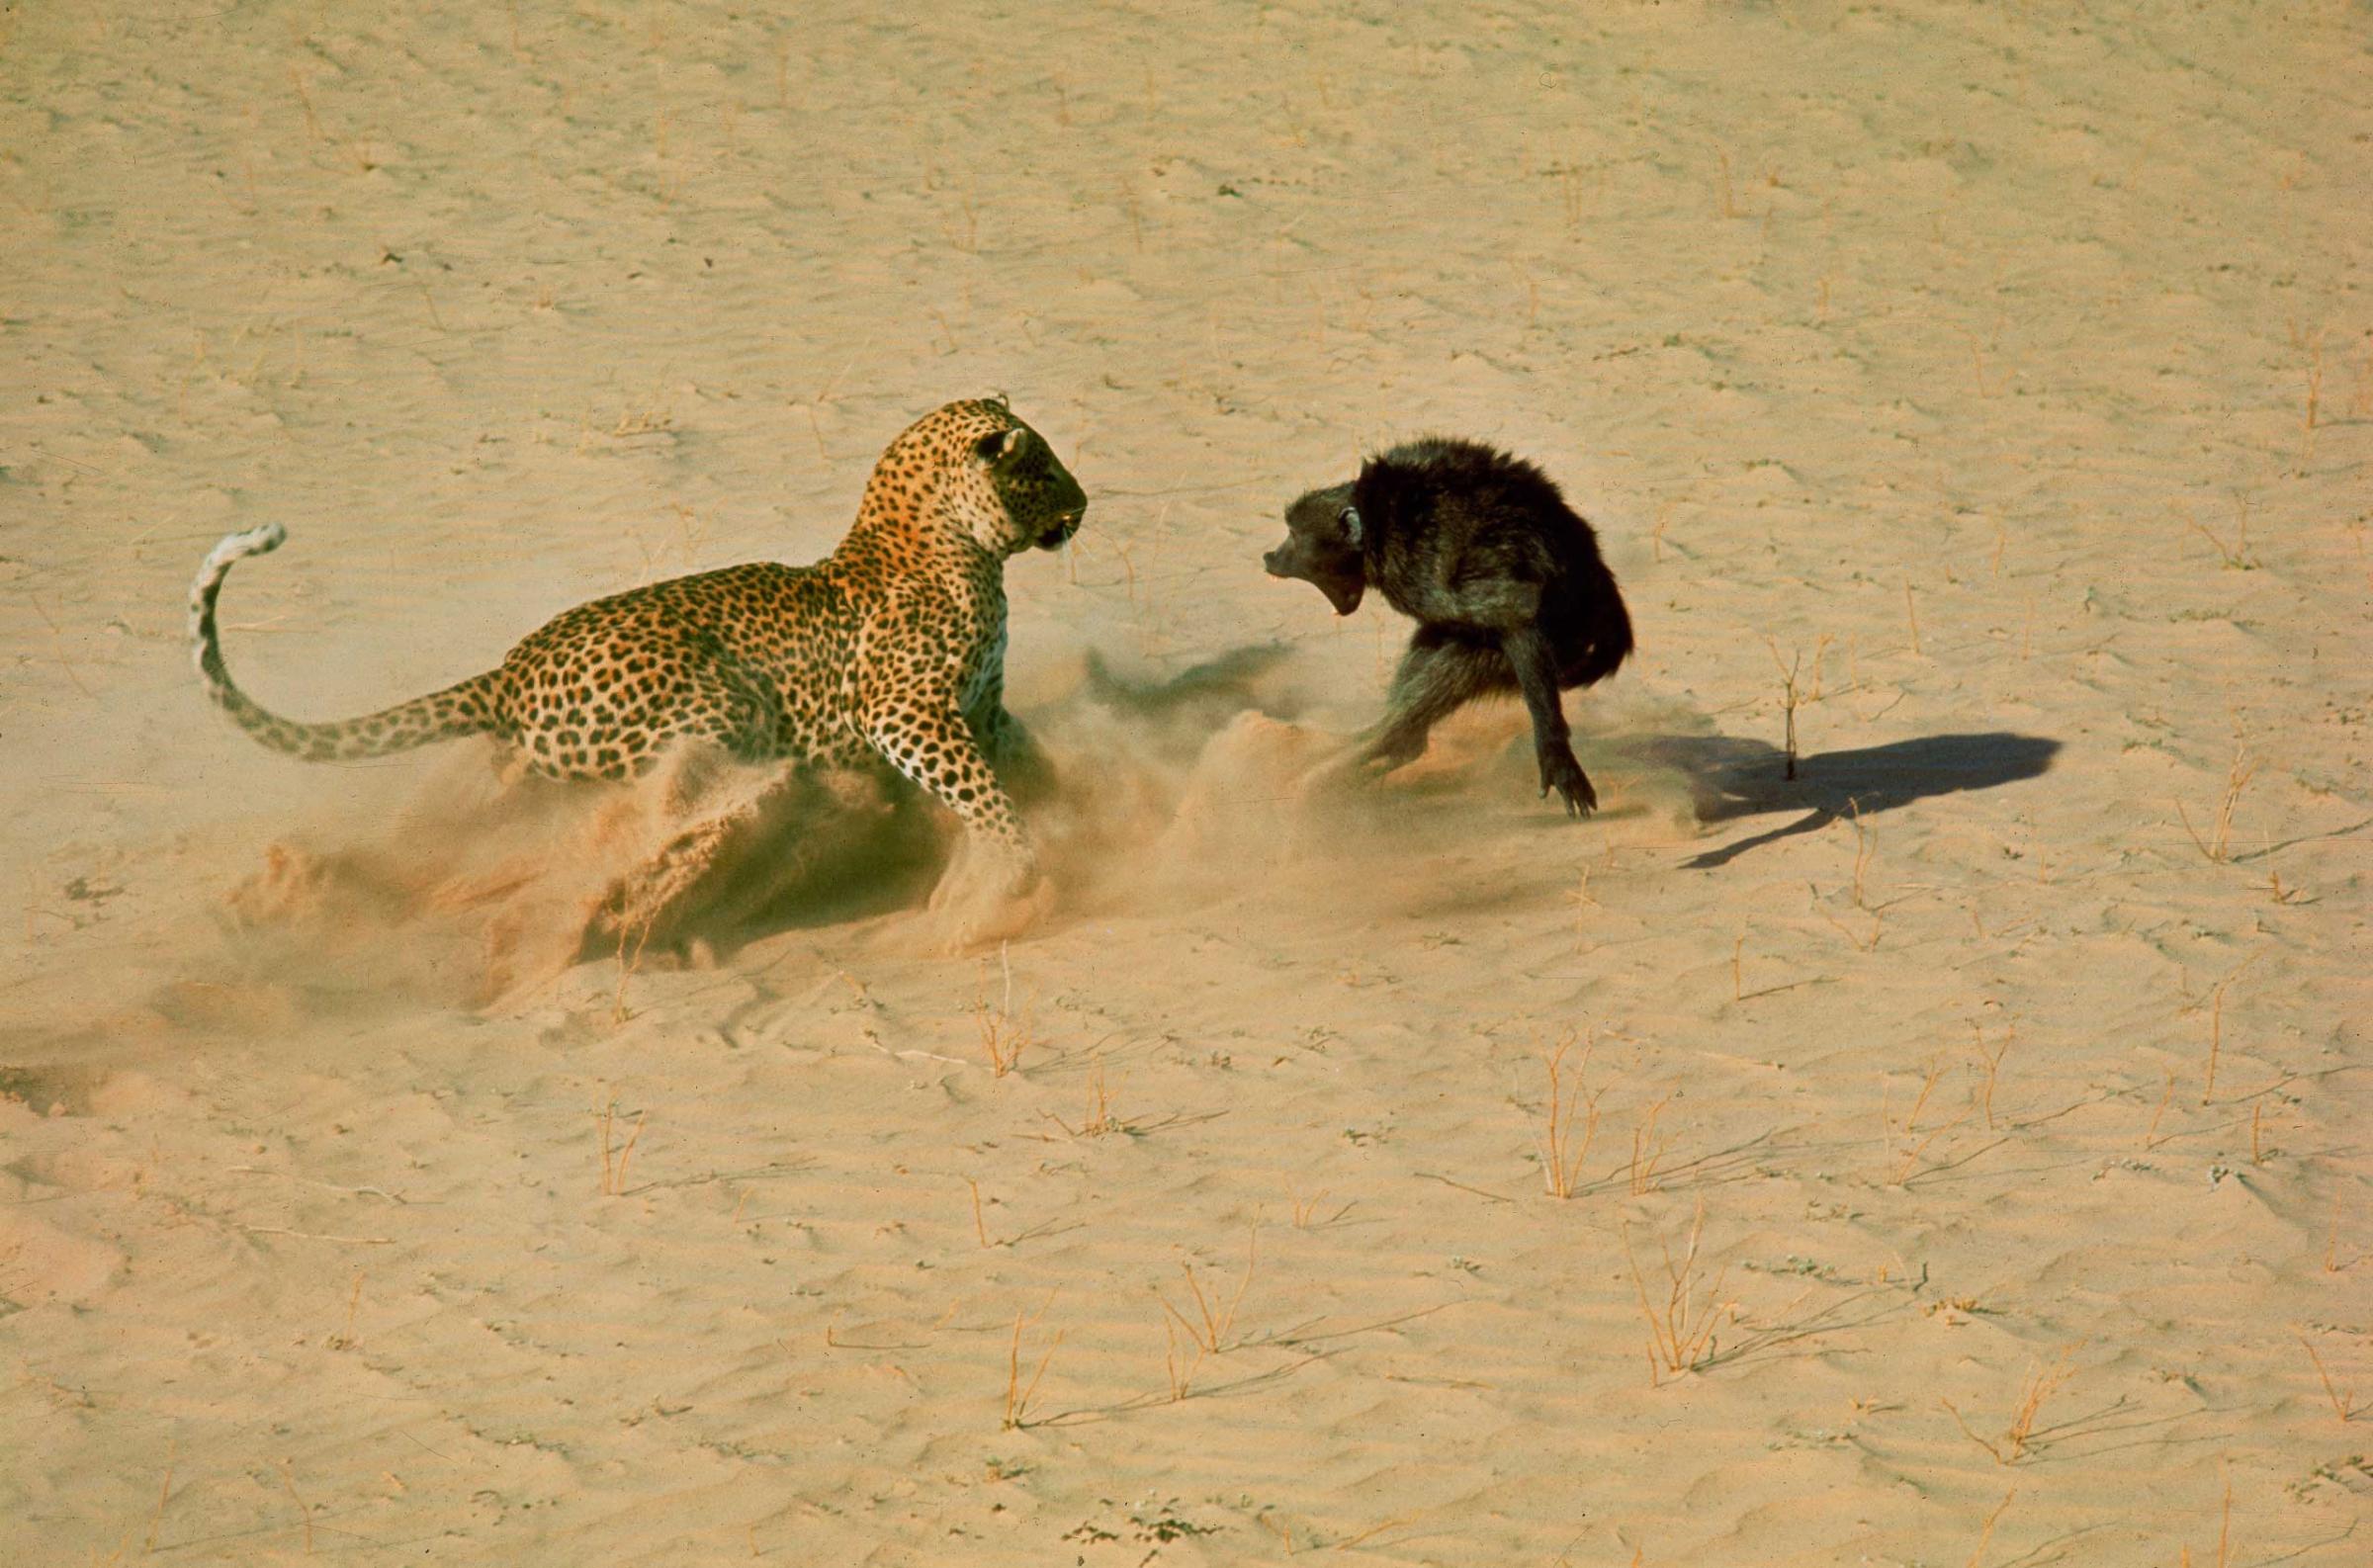 A leopard about to kill a baboon, 1966.